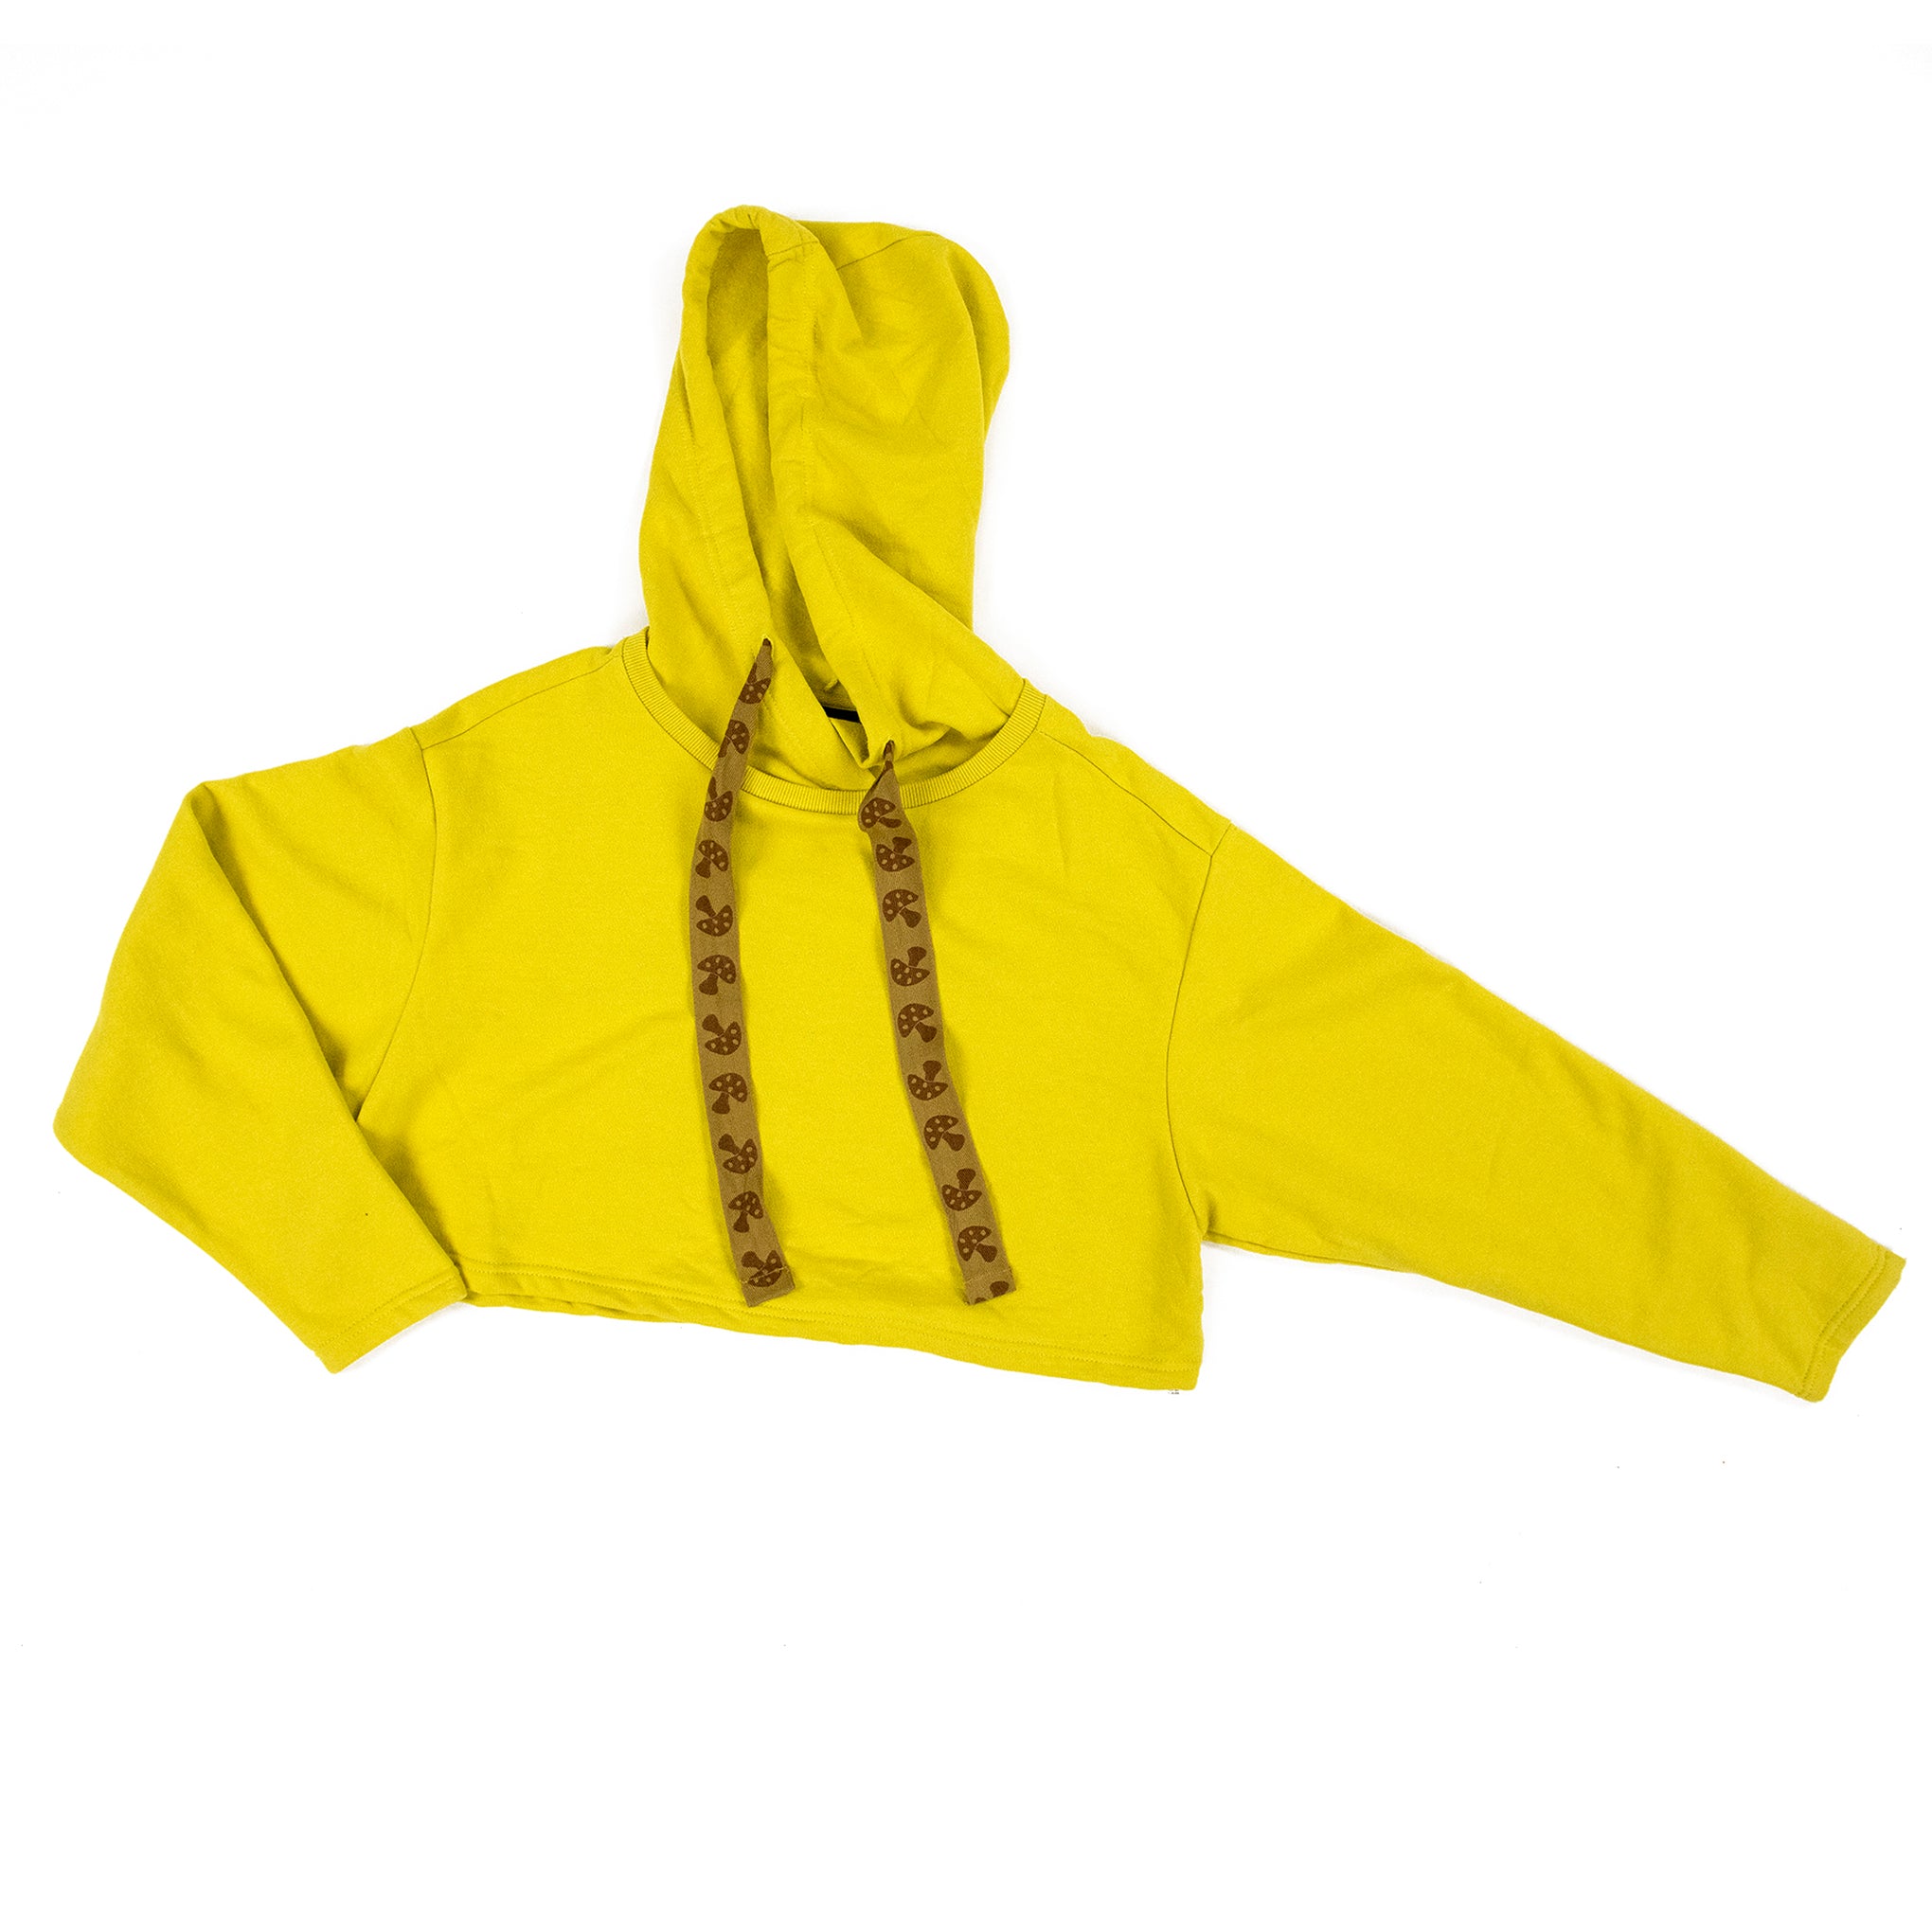 Urban Outfitters Chartreuse Cropped Hoodie with Mushroom Print Drawstring